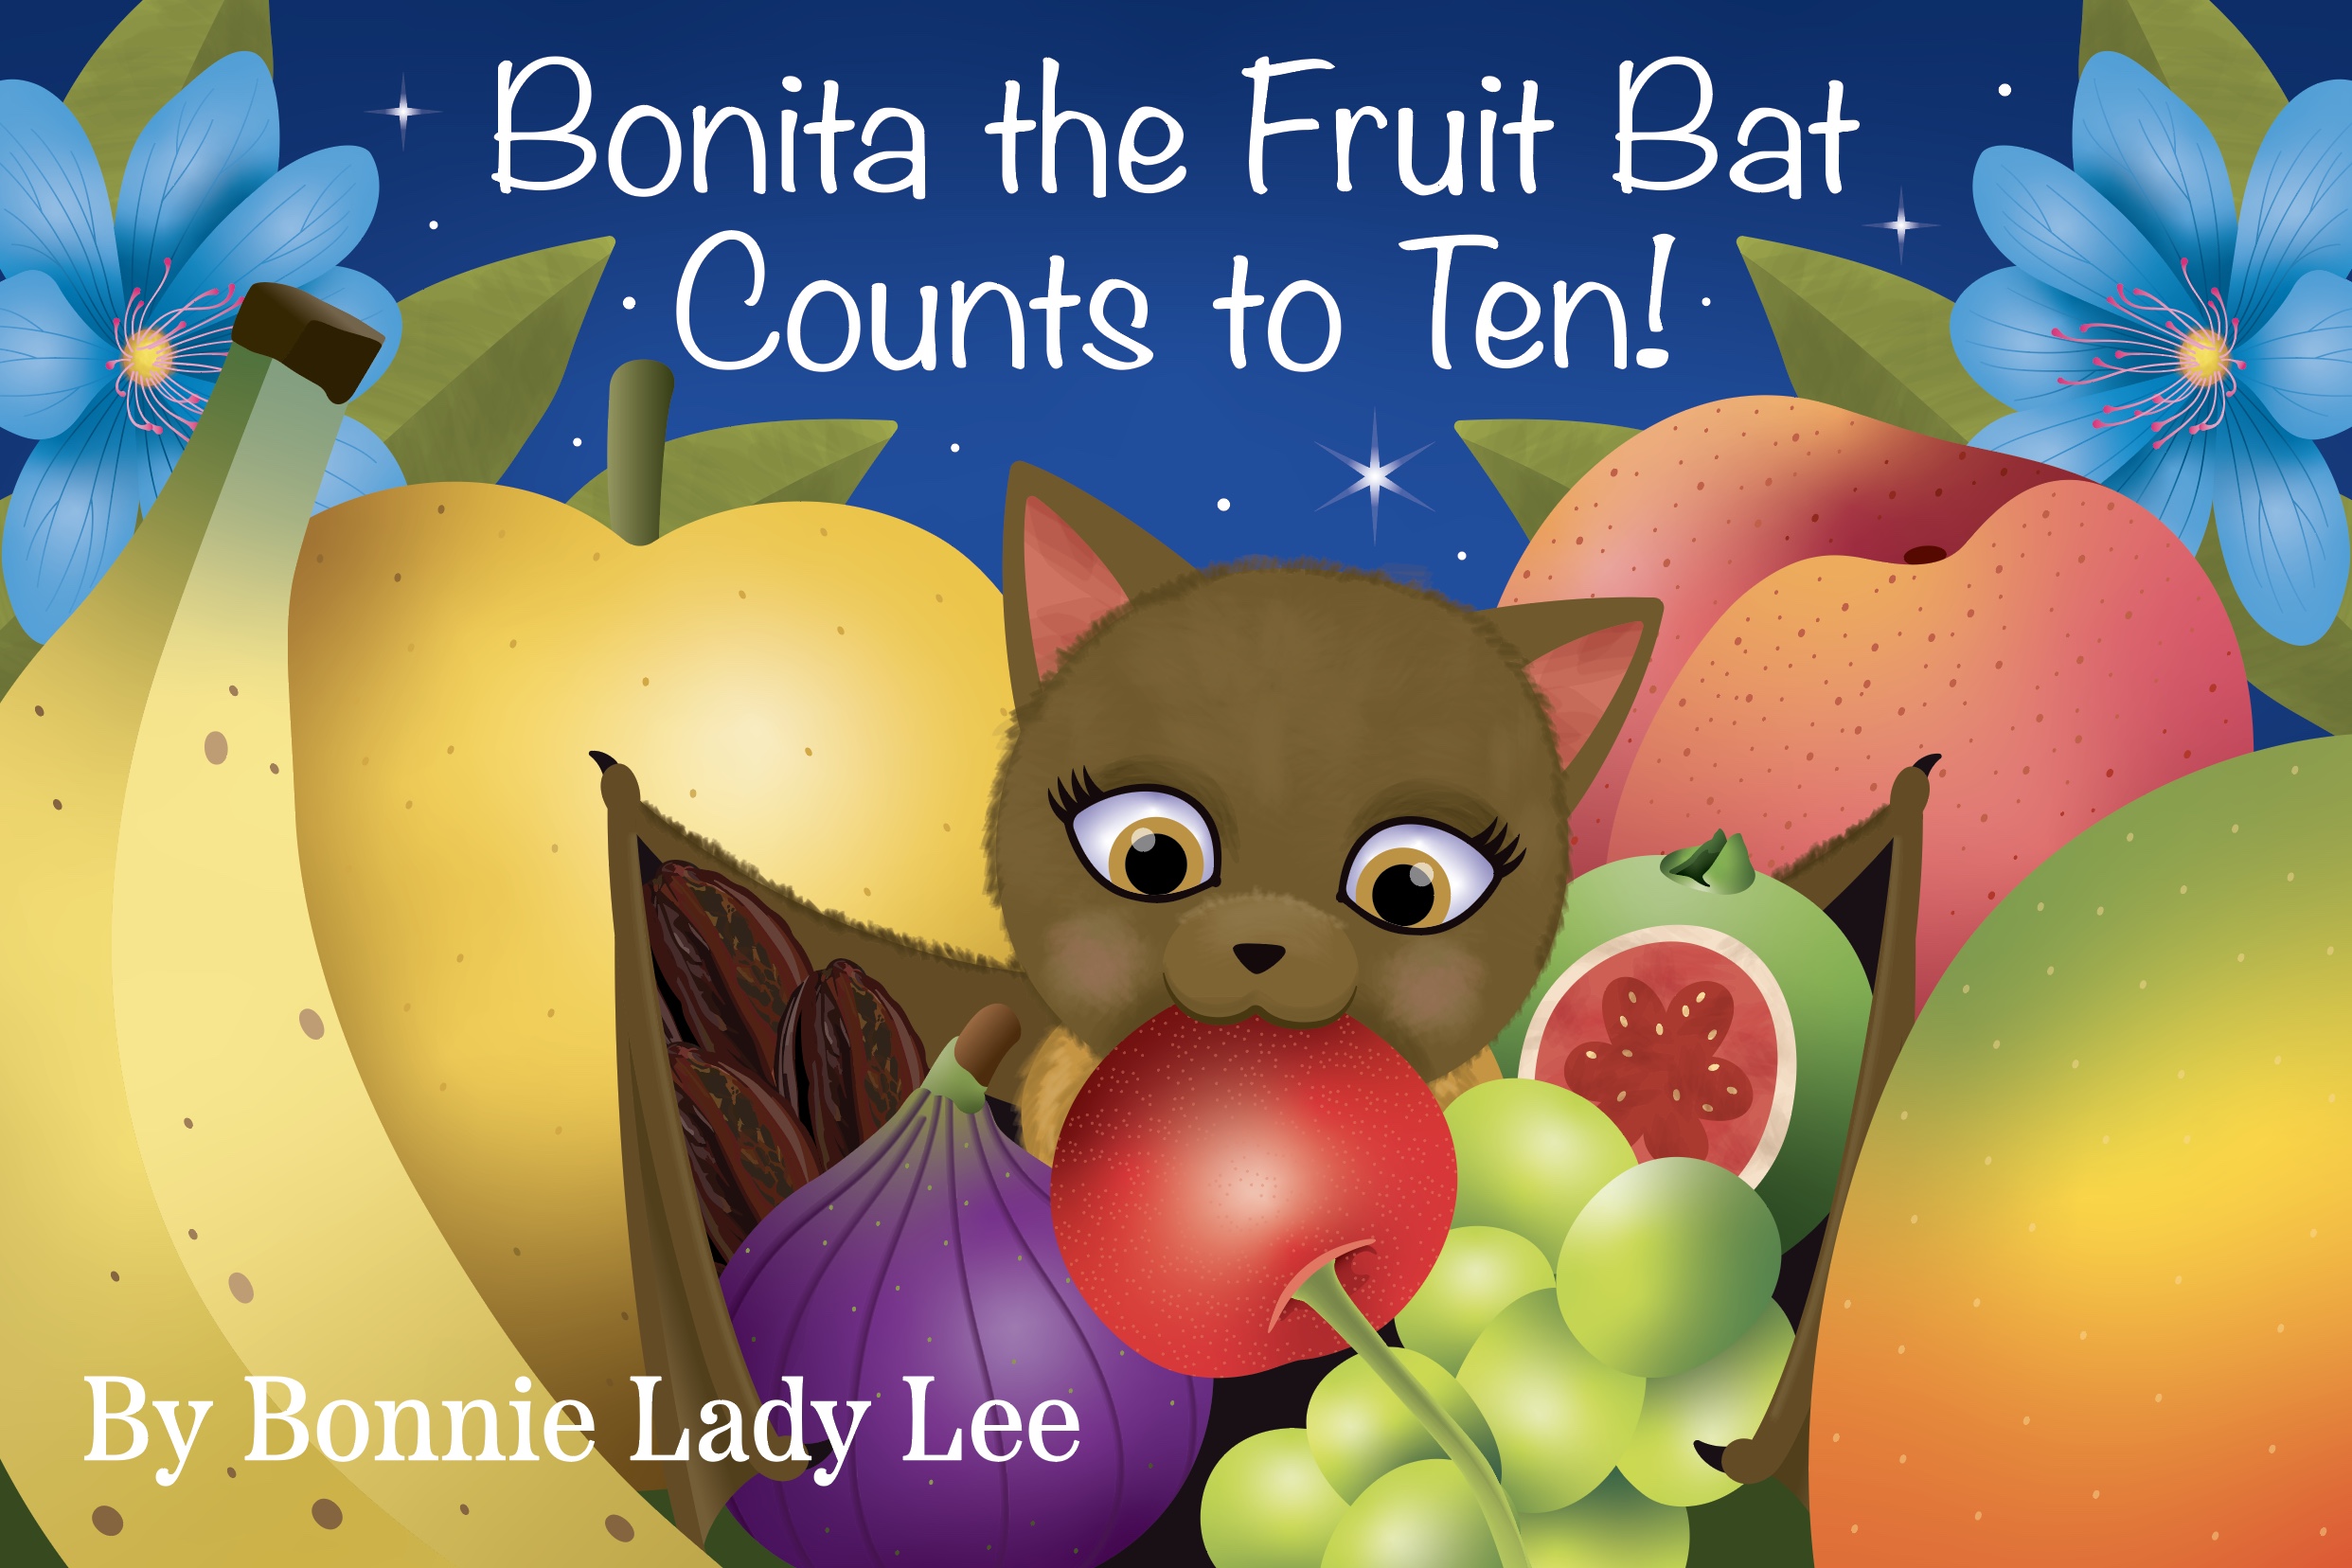 slide 1 Bonita the Fruit Bat Counts to Ten, by Bonnie Lady Lee. Learn with Bonita the Fruit Bat how to count from one to ten using colors and foods she likes to eat. BBoard Book. Ages Baby to 3.